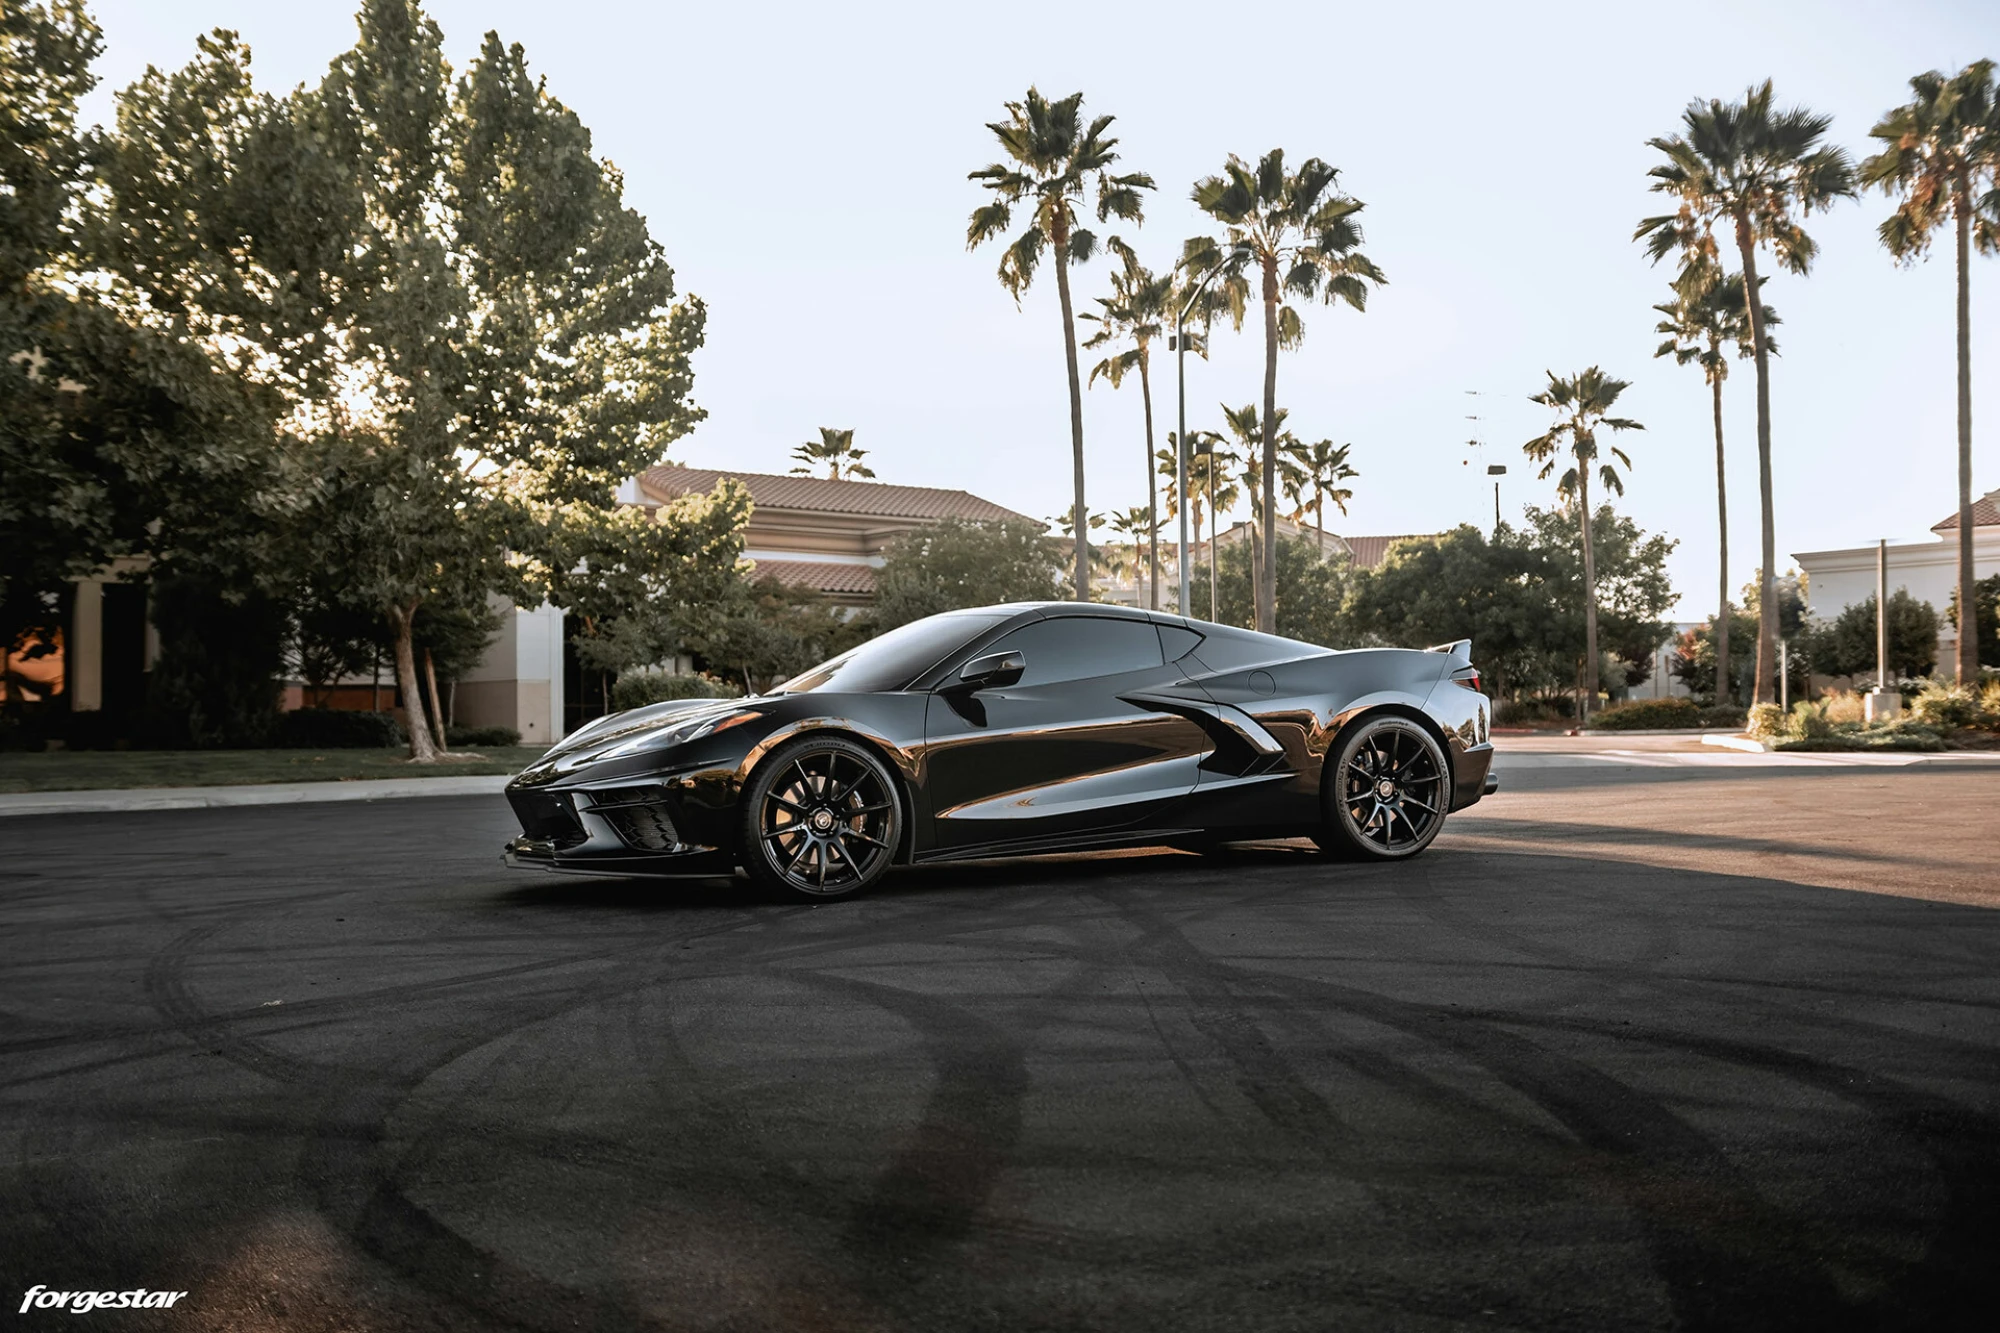 https://mwcompany-forgestar.files.svdcdn.com/production/galleryImages/_2000xAUTO_fit_center-center_90_none/7422/black-c8-corvette-forgestar-custom-wheels-mid-engine-modified-k.webp